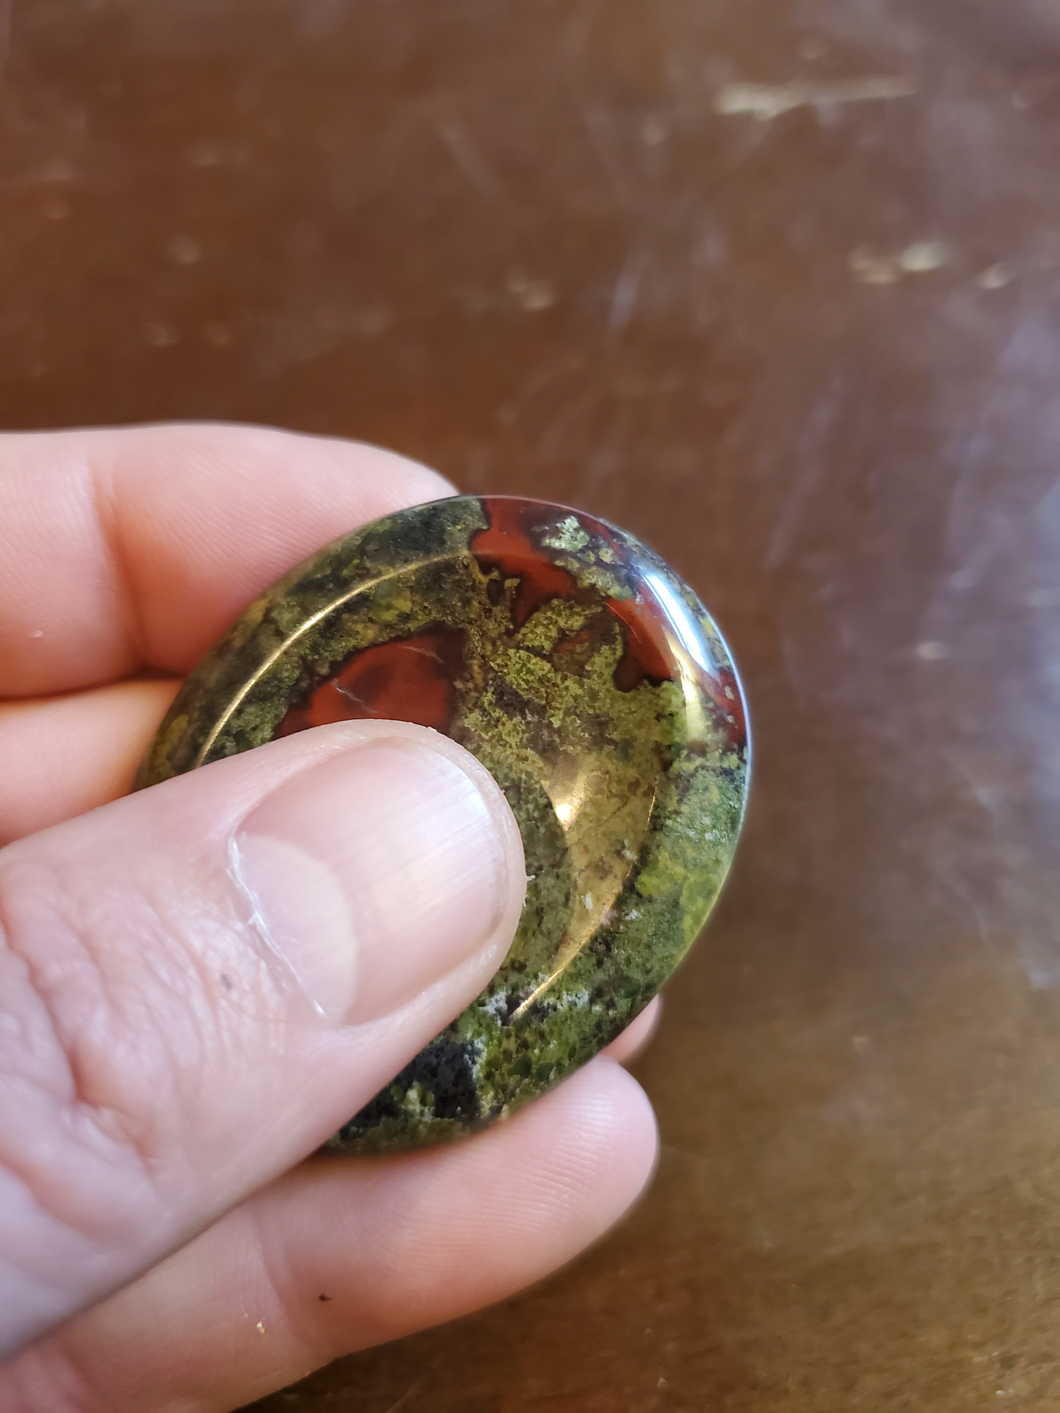 Dragon Bloodstone is mined in South Africa. Legend says the stone is the remains of deceased ancient dragons; the green being the skin and the red being the blood.